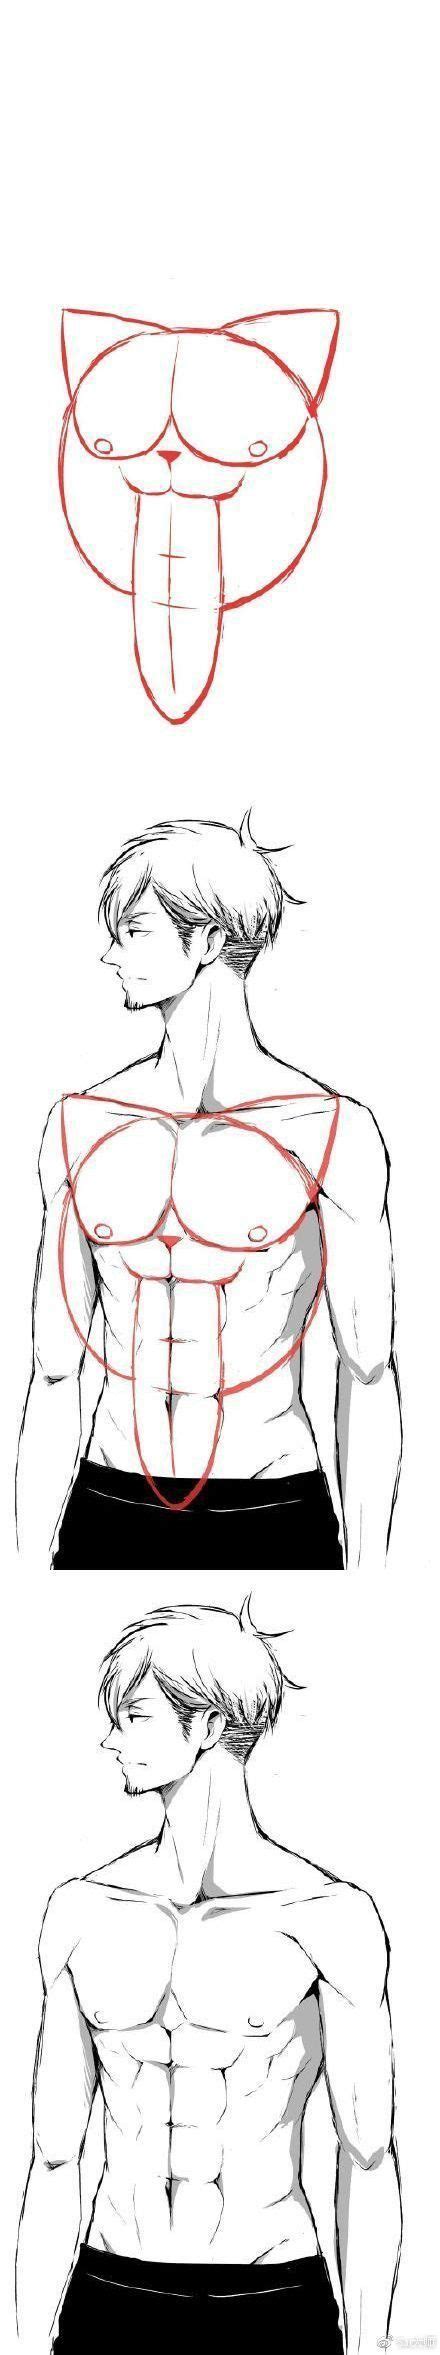 Drawing Body Poses Male Torso 44 Ideas Drawing Tutorial Art Reference Drawings